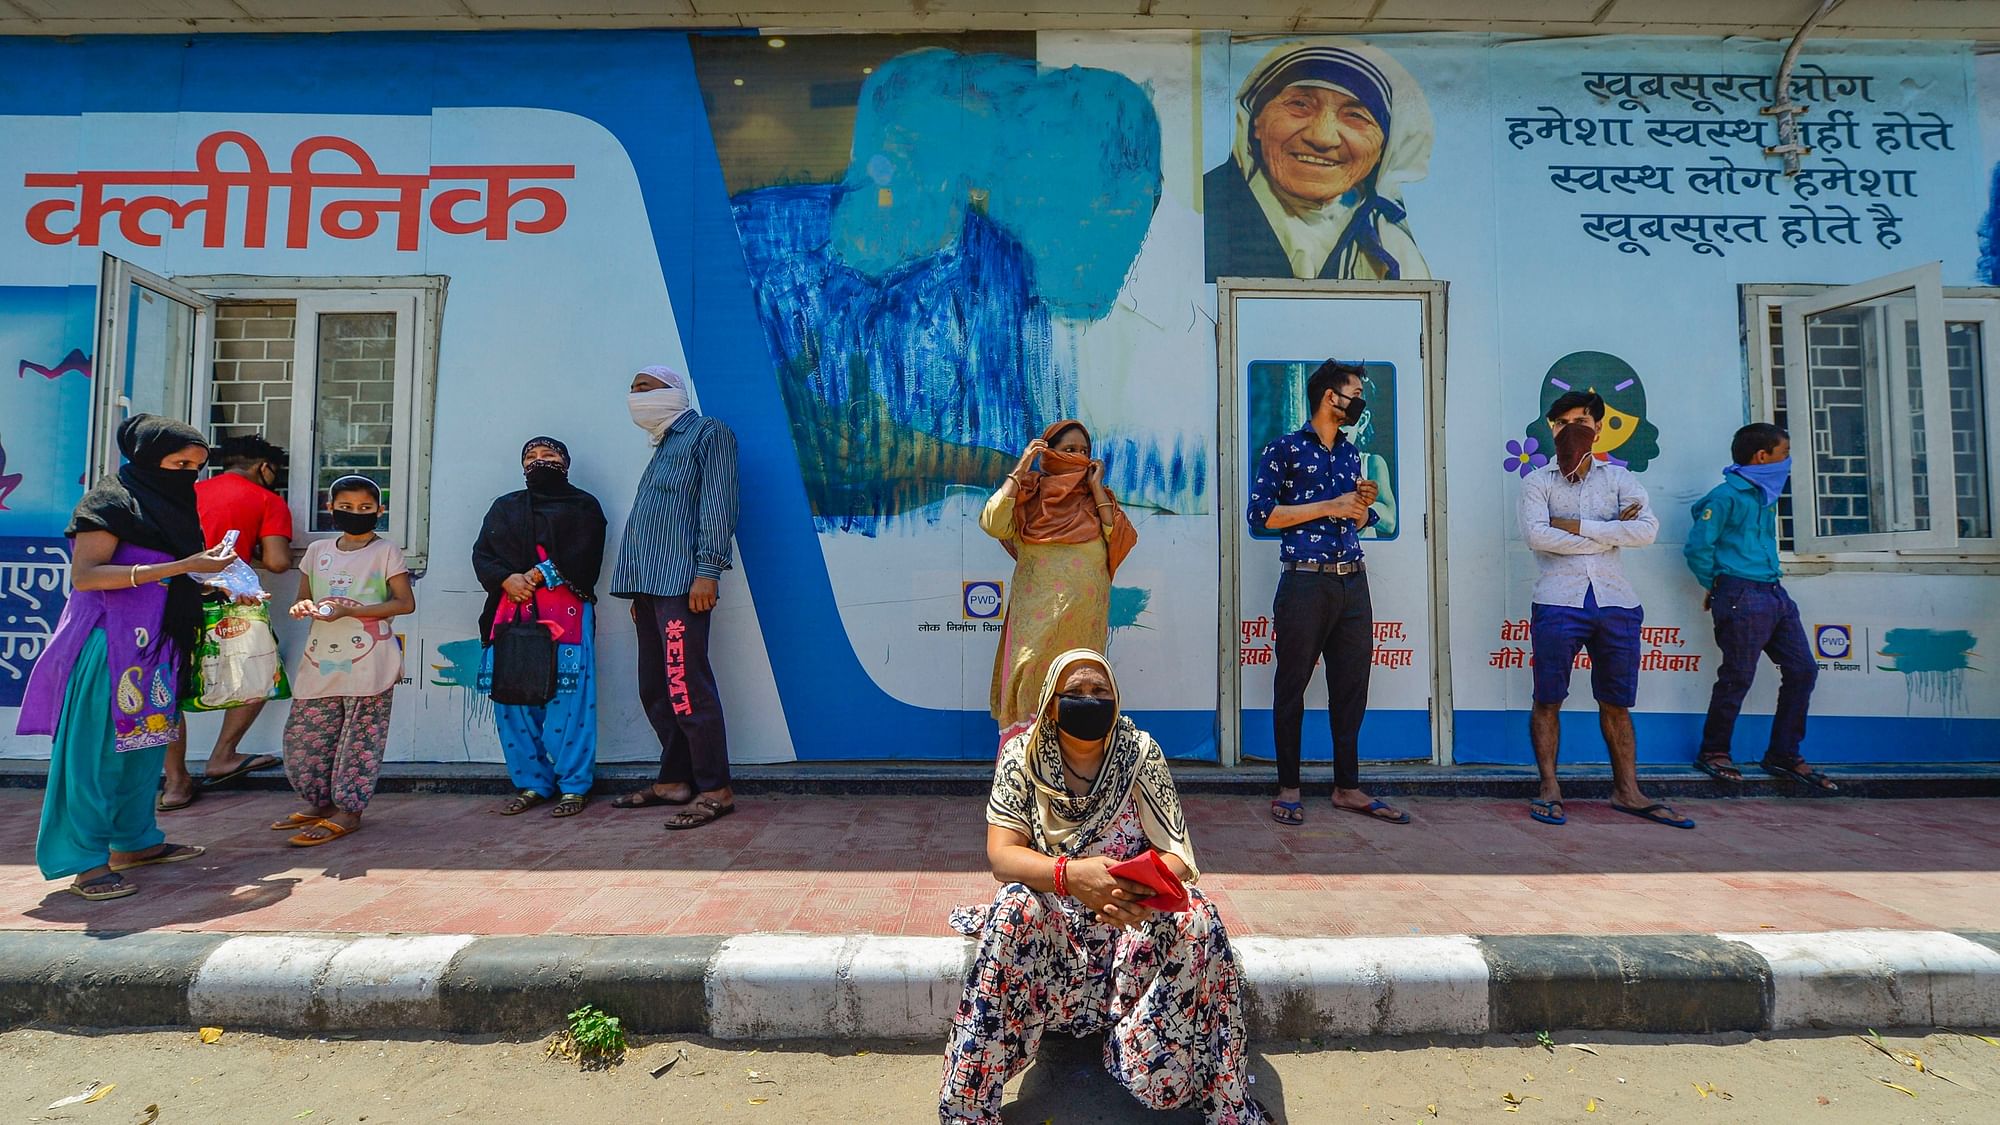 People lined up for check-up outside a clinic run by the Delhi Government during the nationwide lockdown imposed in view of the coronavirus pandemic, in New Delhi, Wednesday, 8 April 2020.